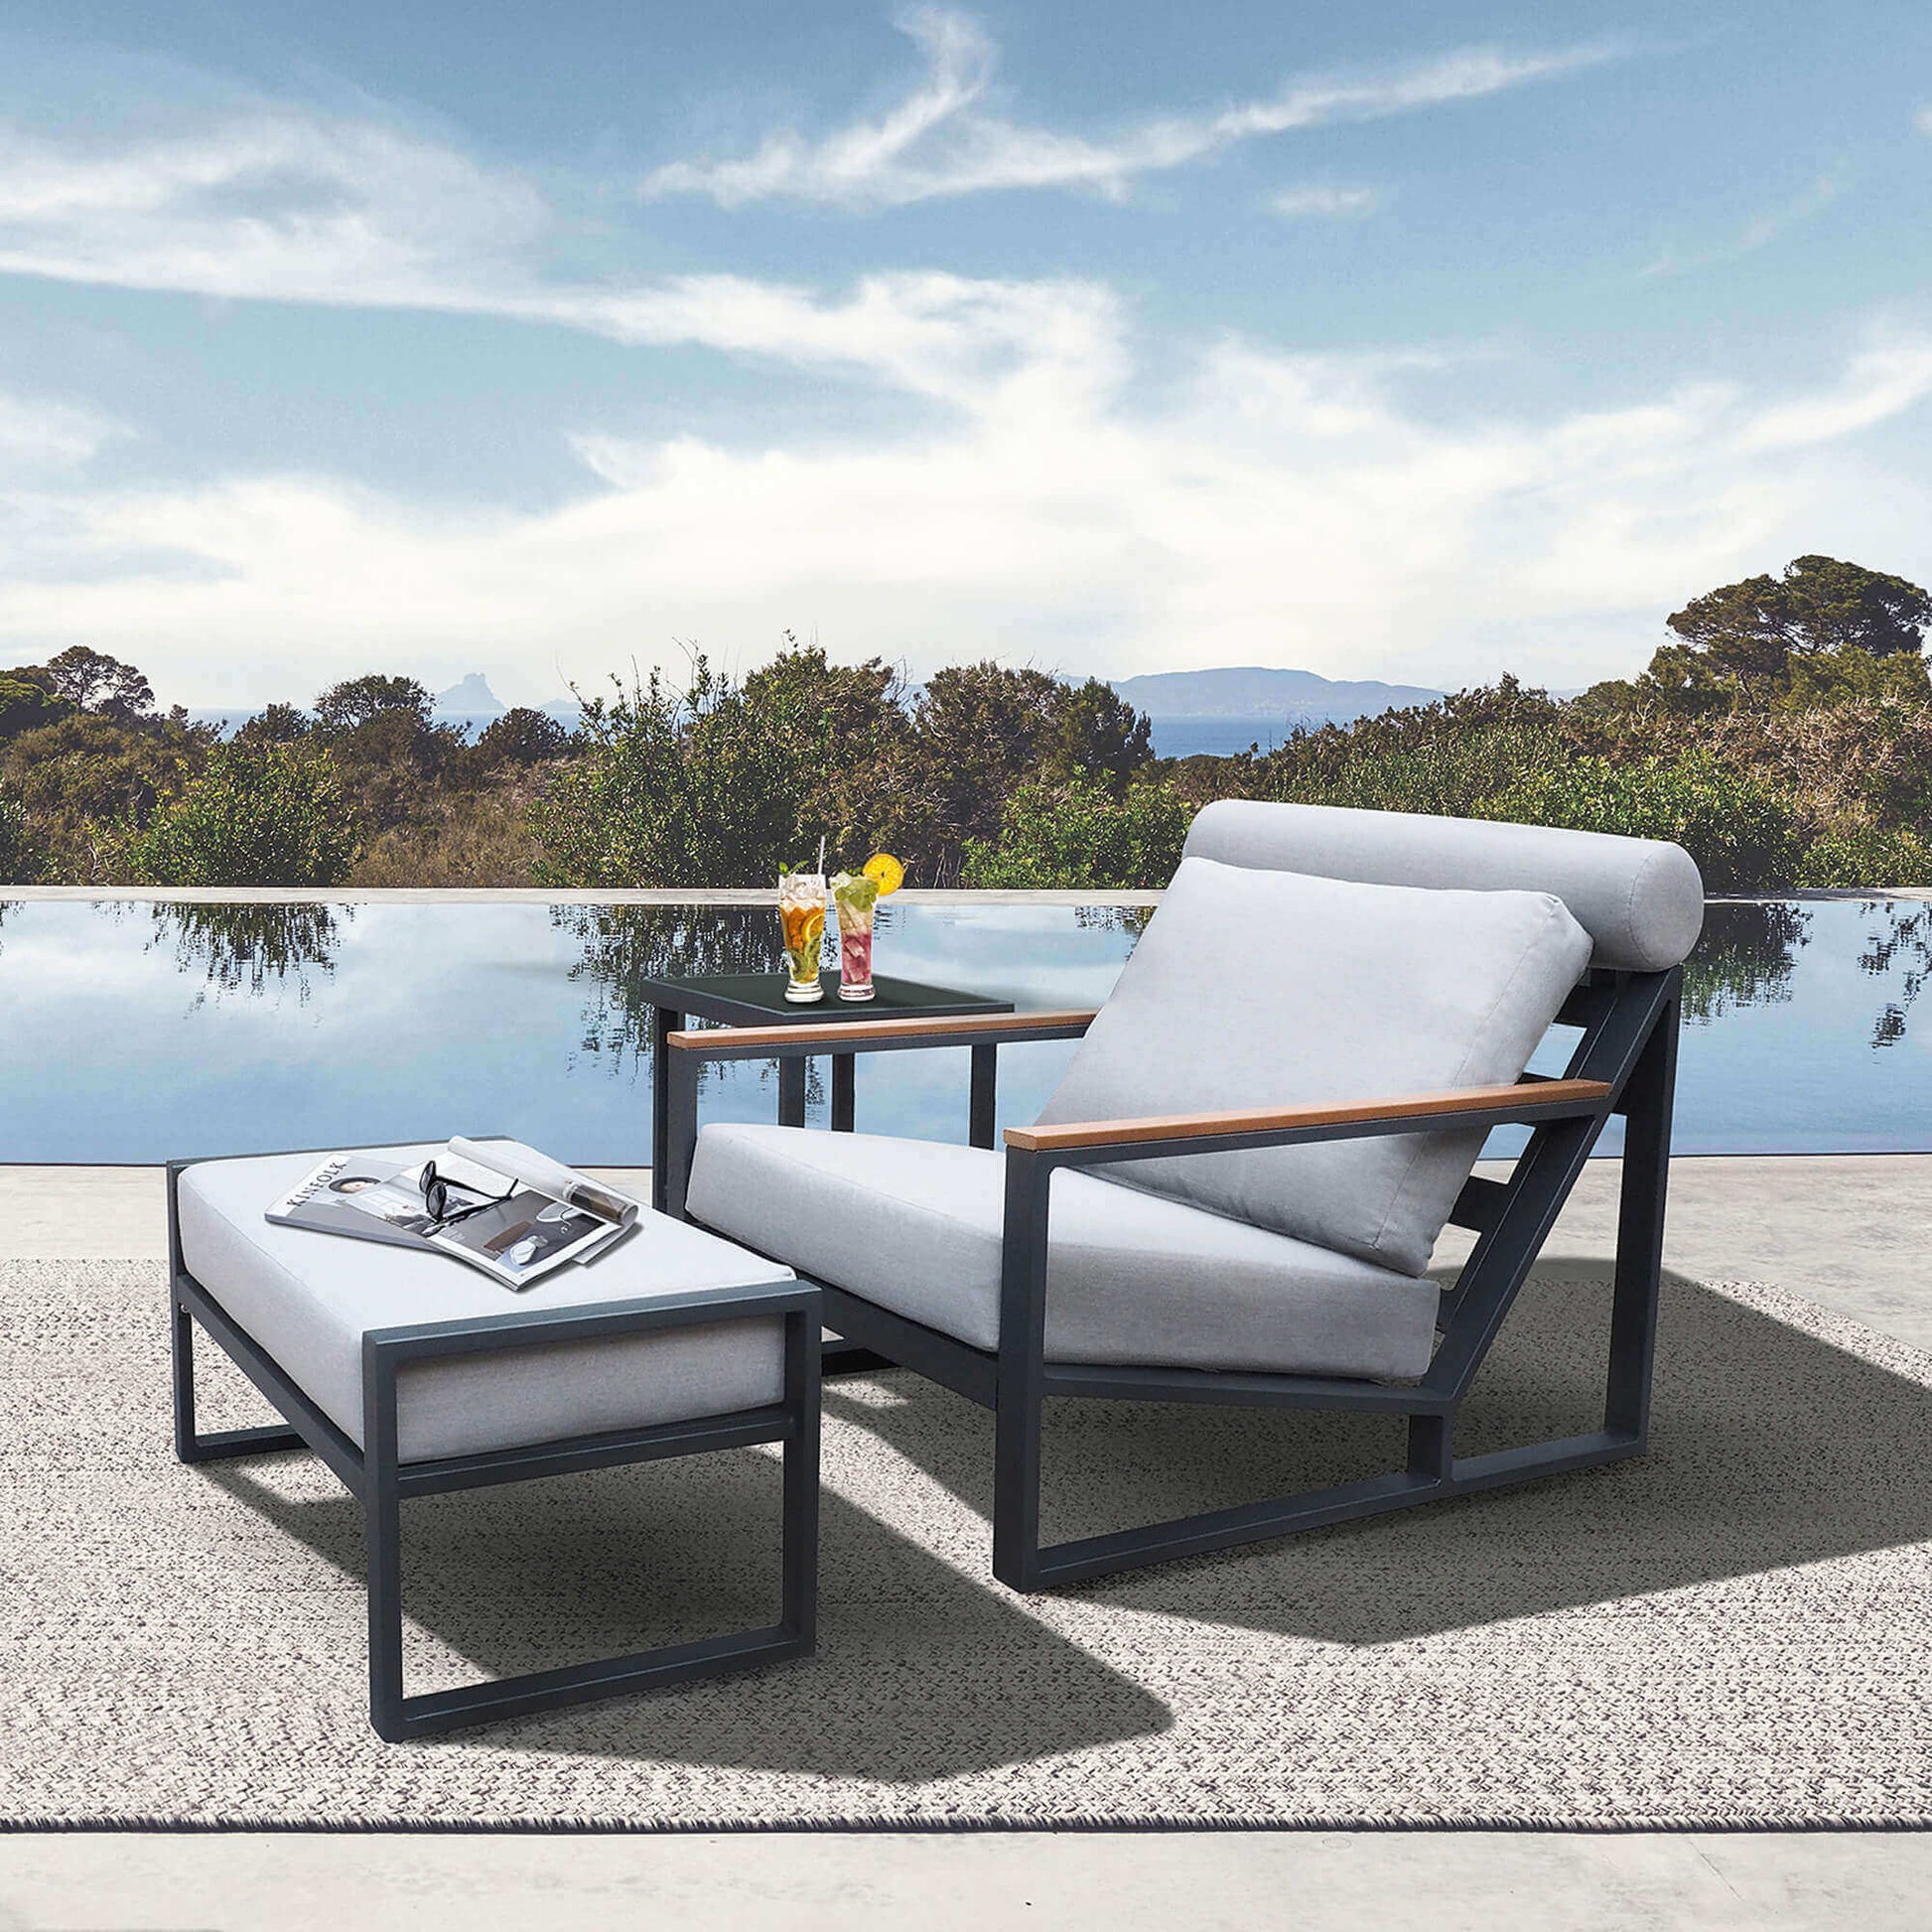 Arttoreal Aluminum Patio Furniture Set Outdoor Patio Chairs with Ottomans